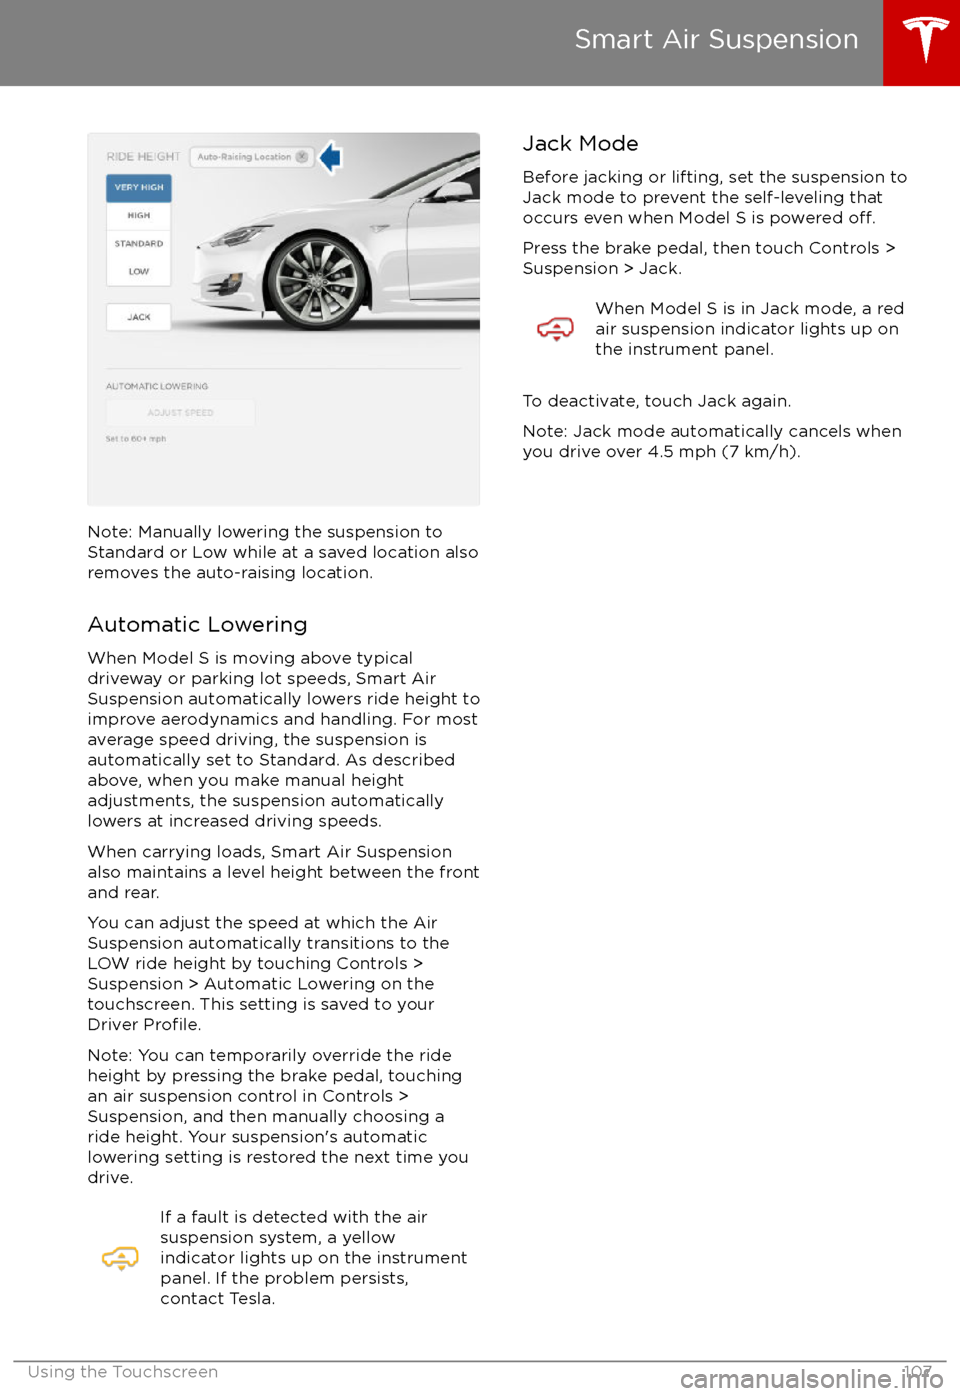 TESLA MODEL S 2017  Owners Manual Note: Manually lowering the suspension toStandard or Low while at a saved location alsoremoves the auto-raising location.
Automatic Lowering
When Model S is moving above typical
driveway or parking lo